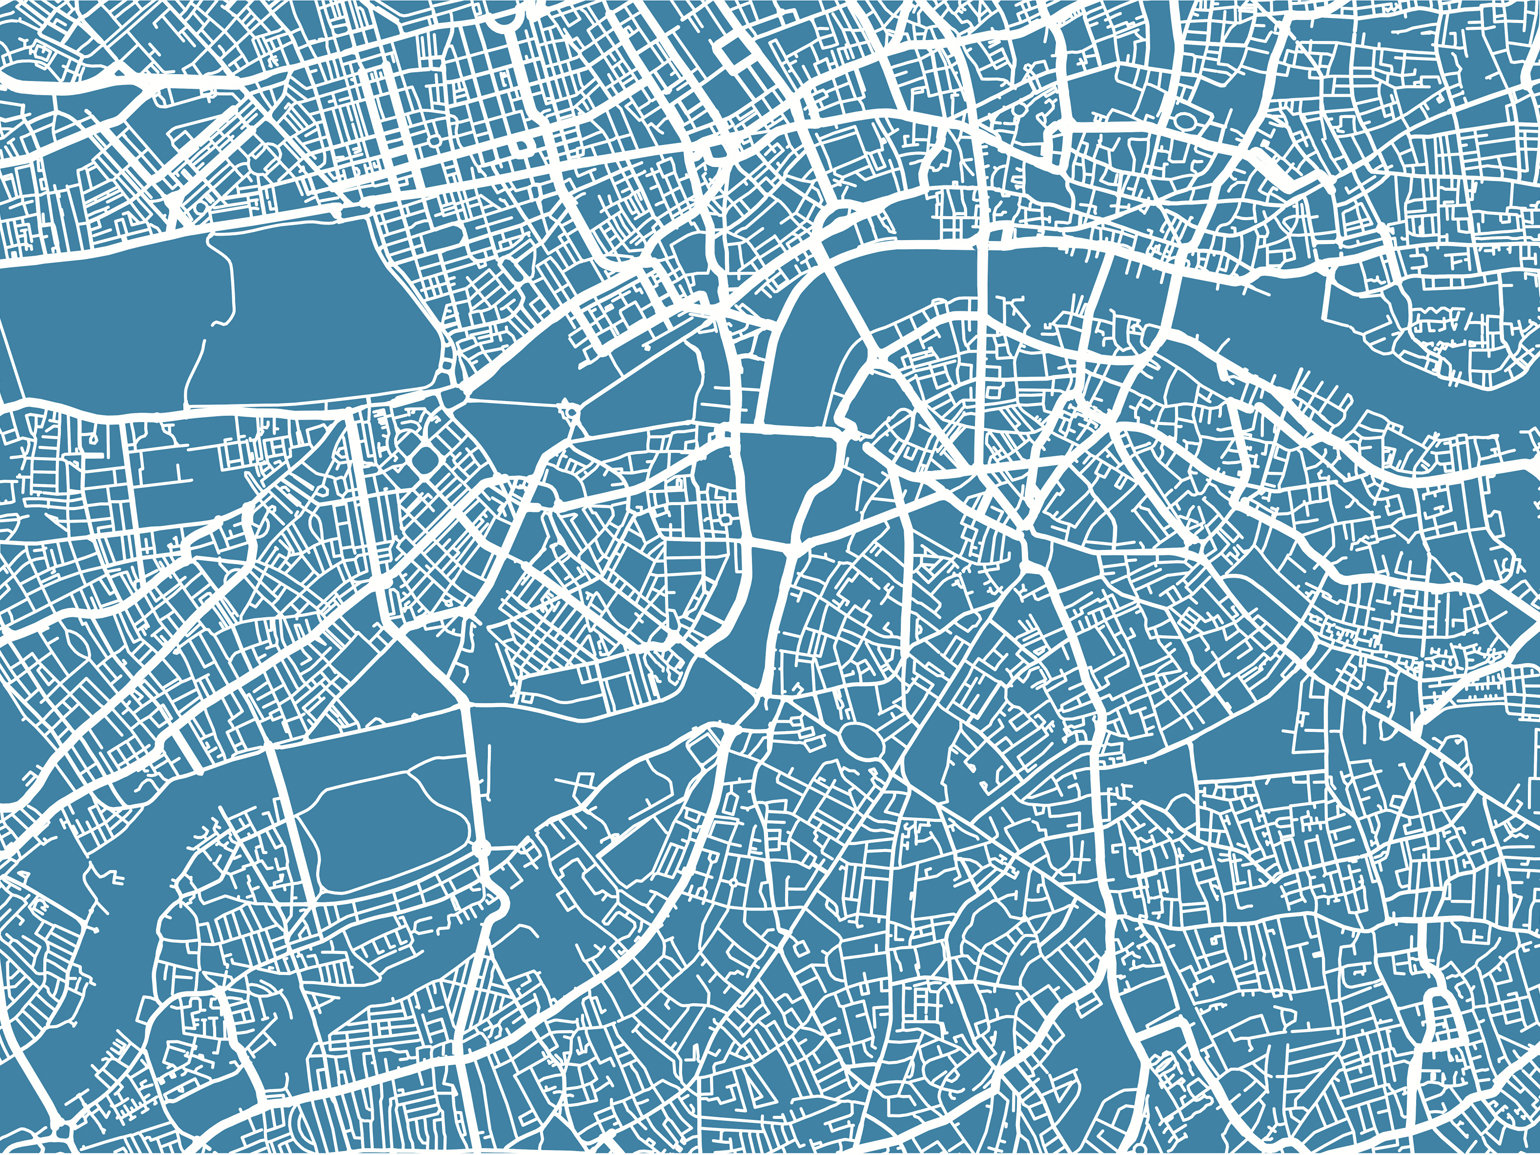 A map of an urban area with a blue background and white roads only. The roads show a pattern that reveals a river running though the urban area.